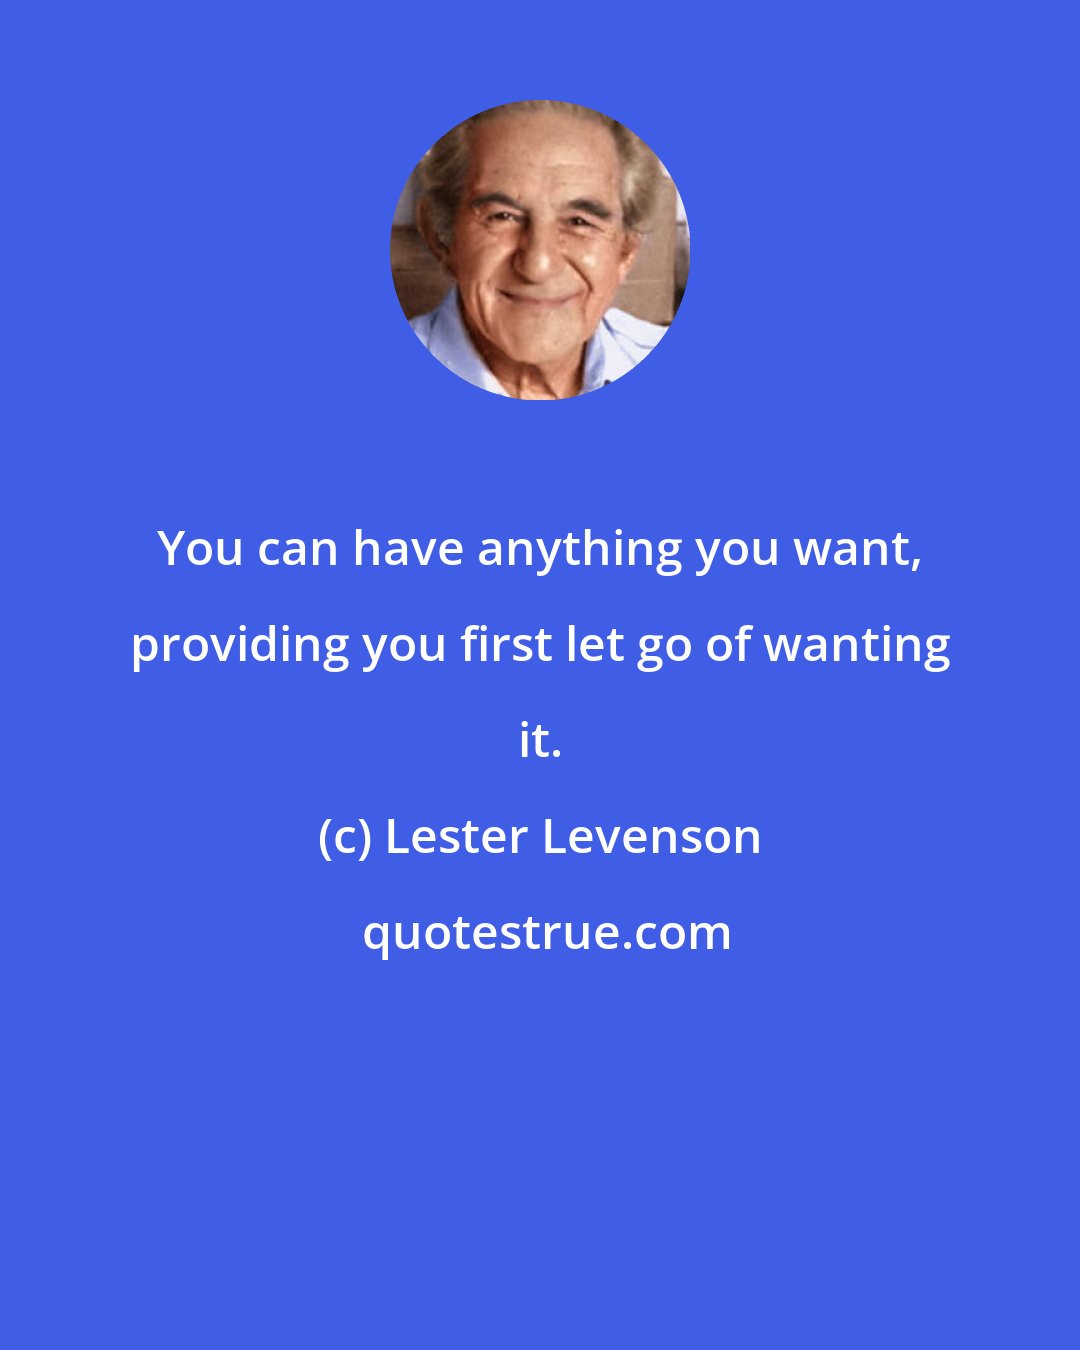 Lester Levenson: You can have anything you want, providing you first let go of wanting it.